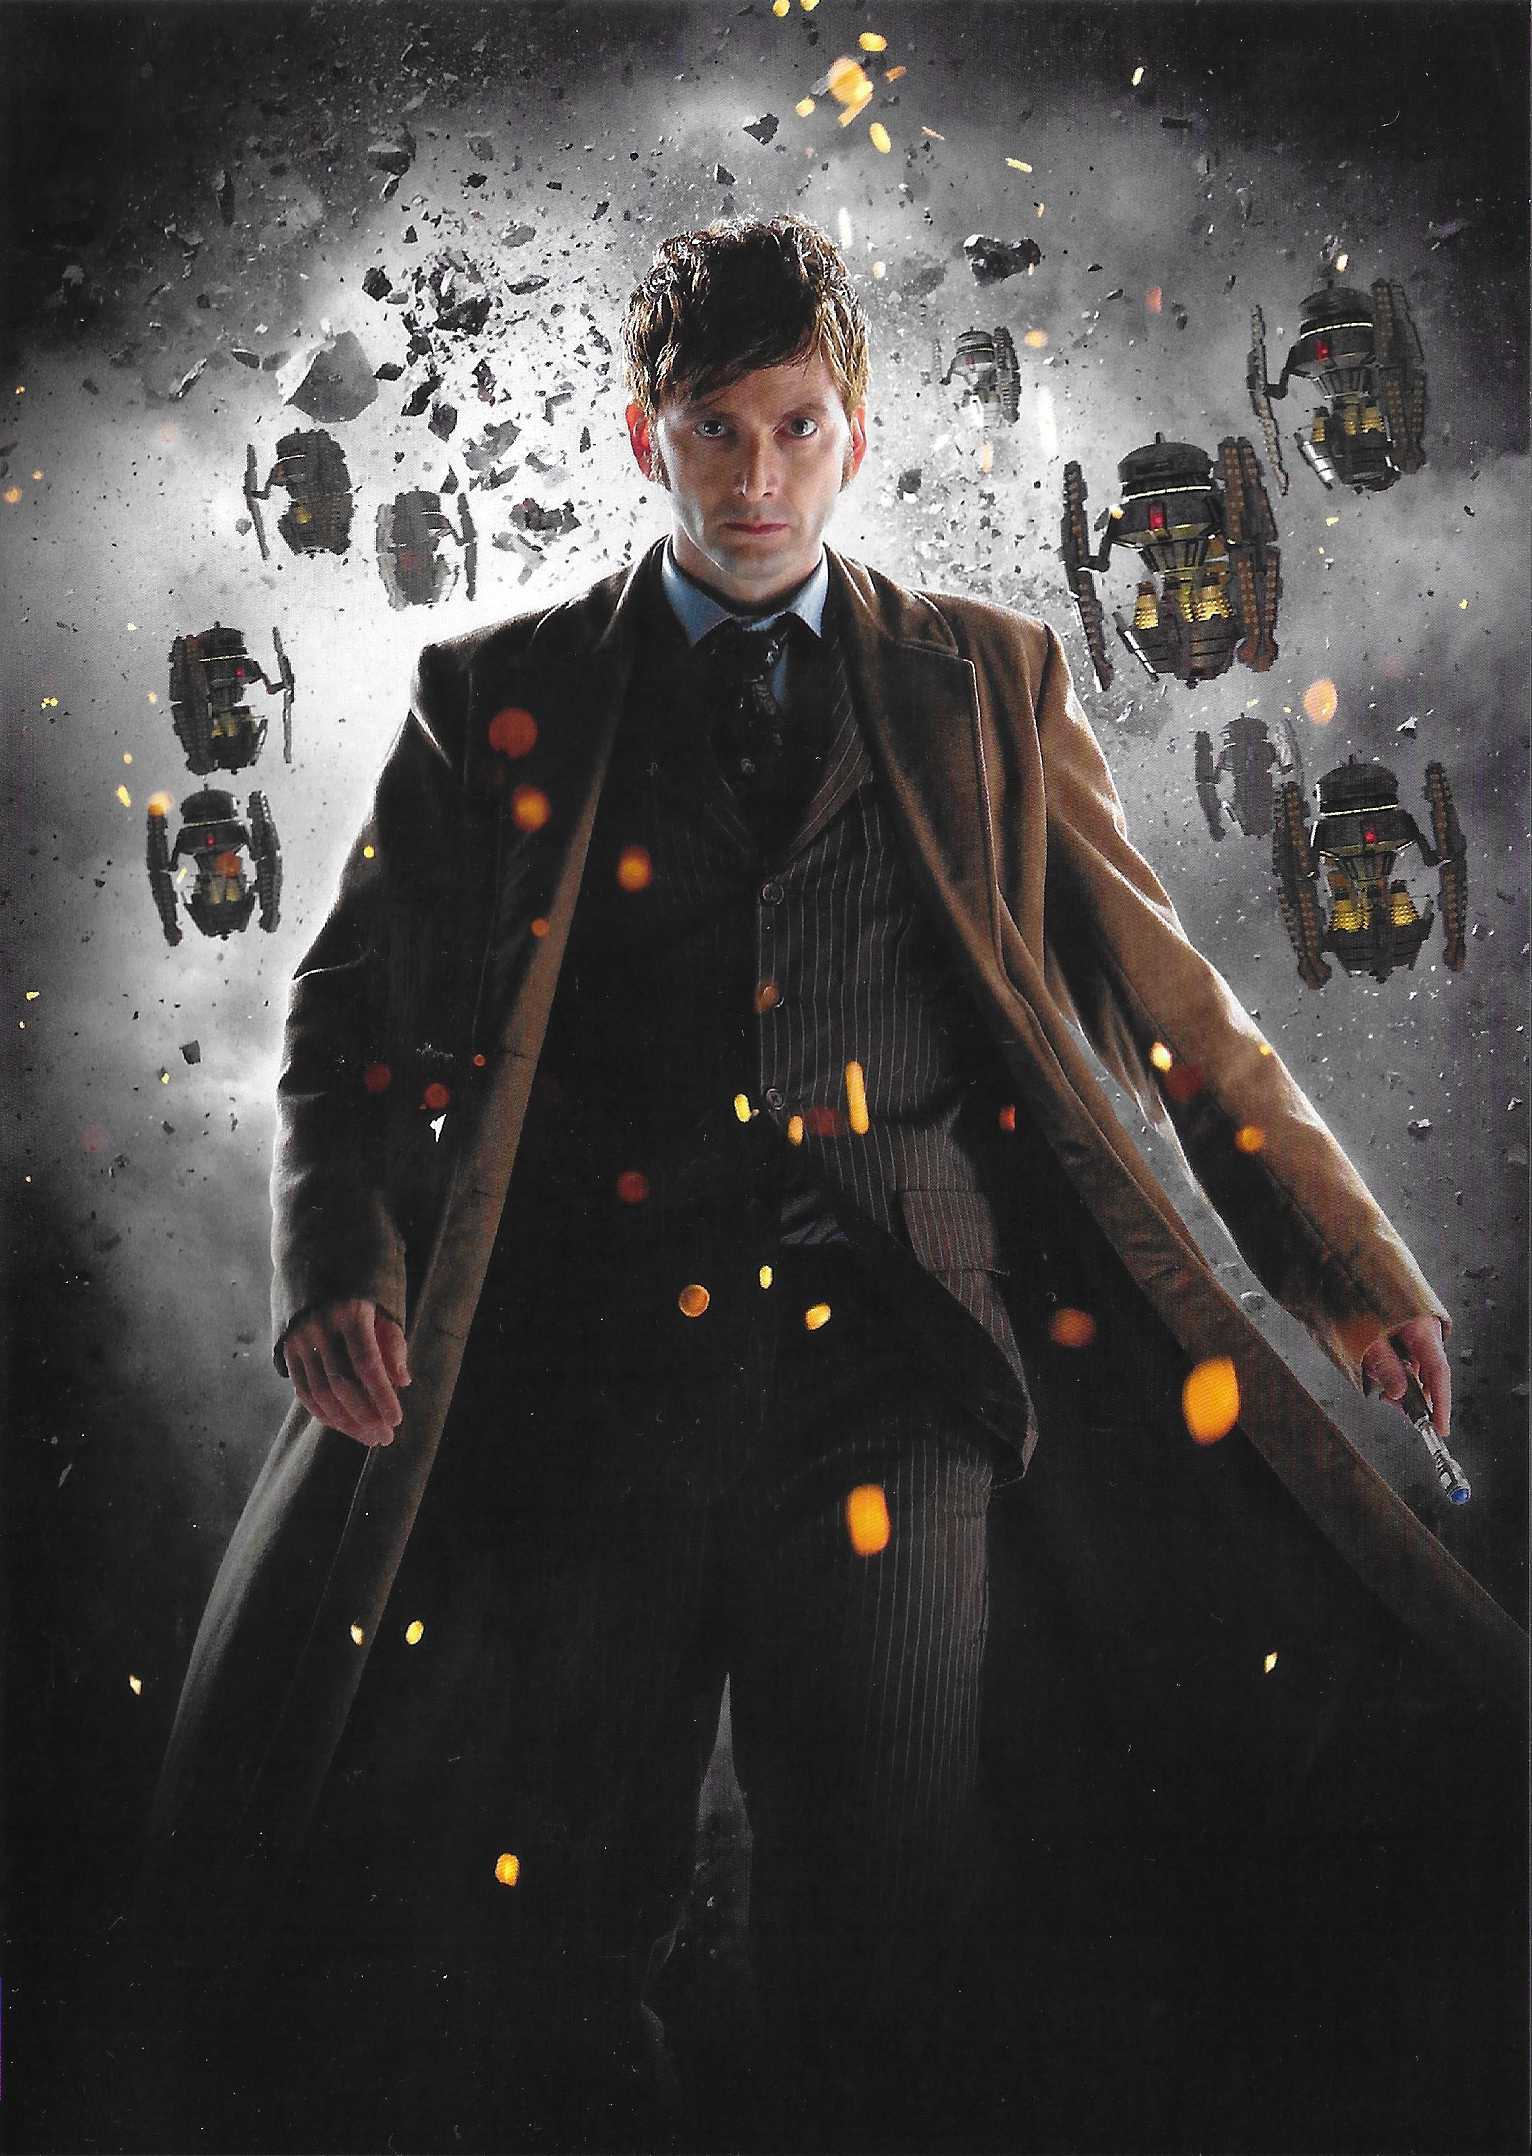 Picture of BBCDVD 3933 02 Doctor Who - The day of the Doctor by artist Steven Moffat from the BBC records and Tapes library